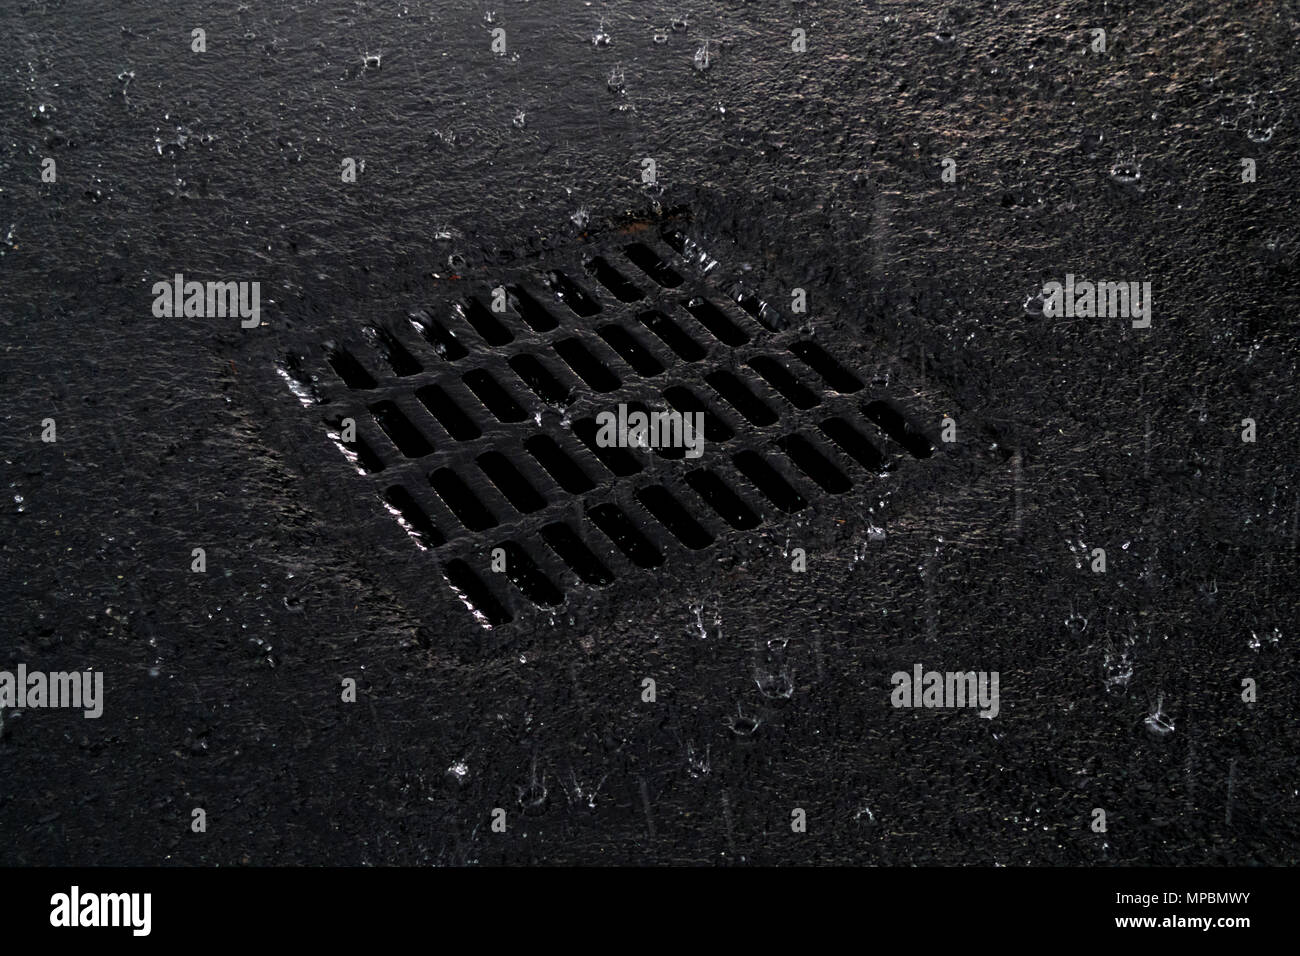 Storm drain during a torrential downpour in Foley, Alabama, USA Stock Photo